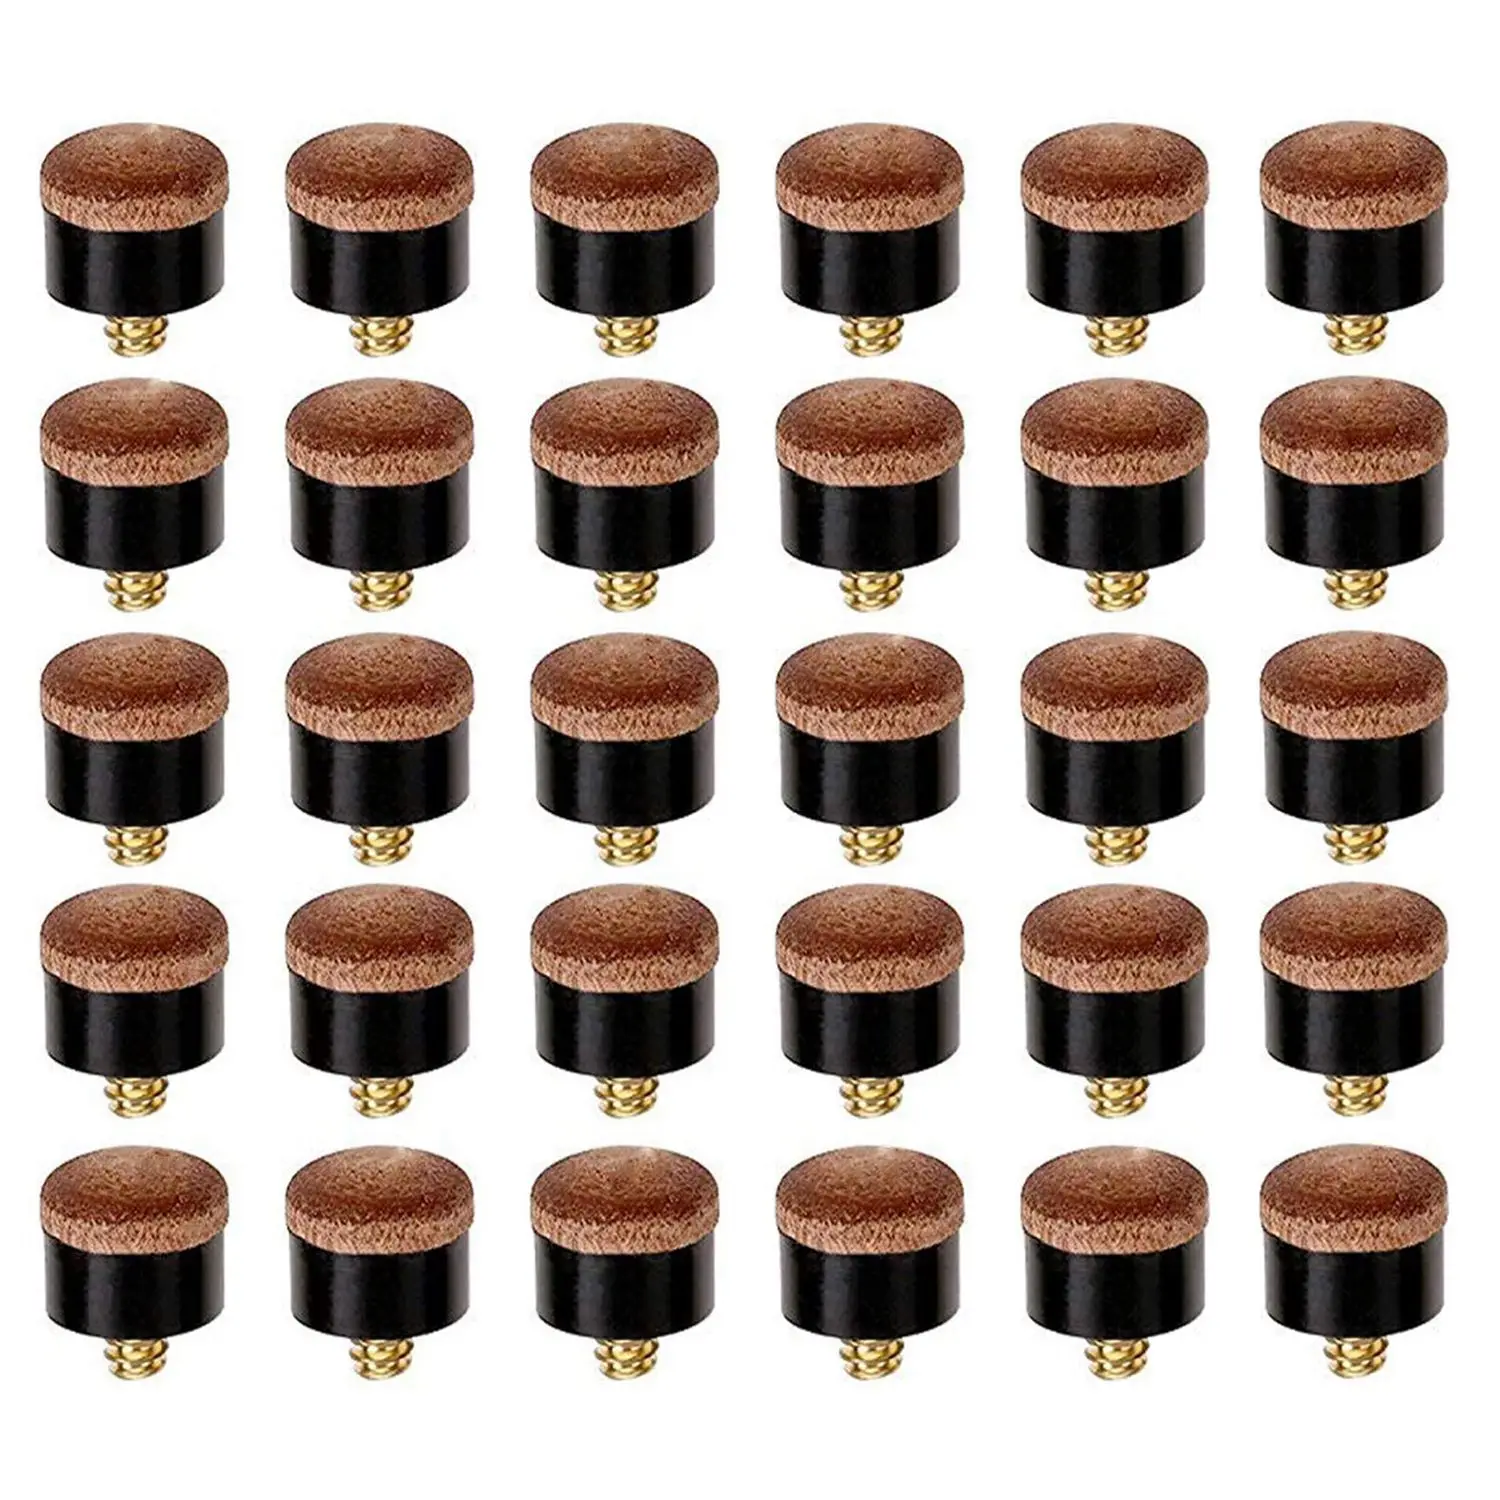 

30 Pcs Billiard Pool Cue Stick Screw-on Tips 12mm Replacement Billiard Cue Tips for Pool Cues and Snooker